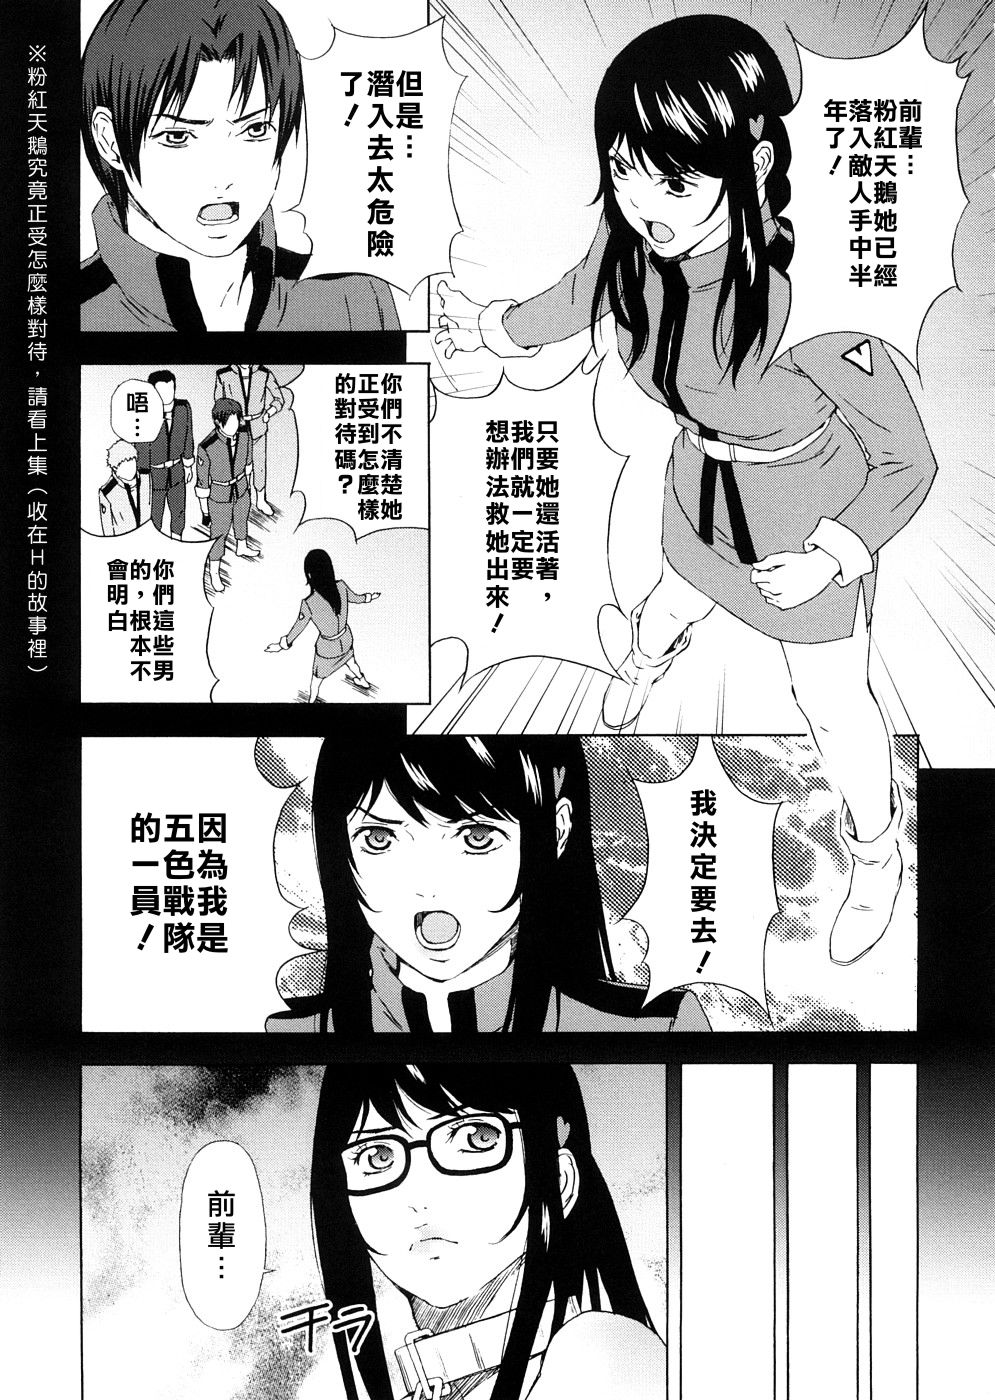 [Amano Ameno] H-Two ch.1-8 [CHINESE] [天野雨乃] H two CH.1-8 [中文]